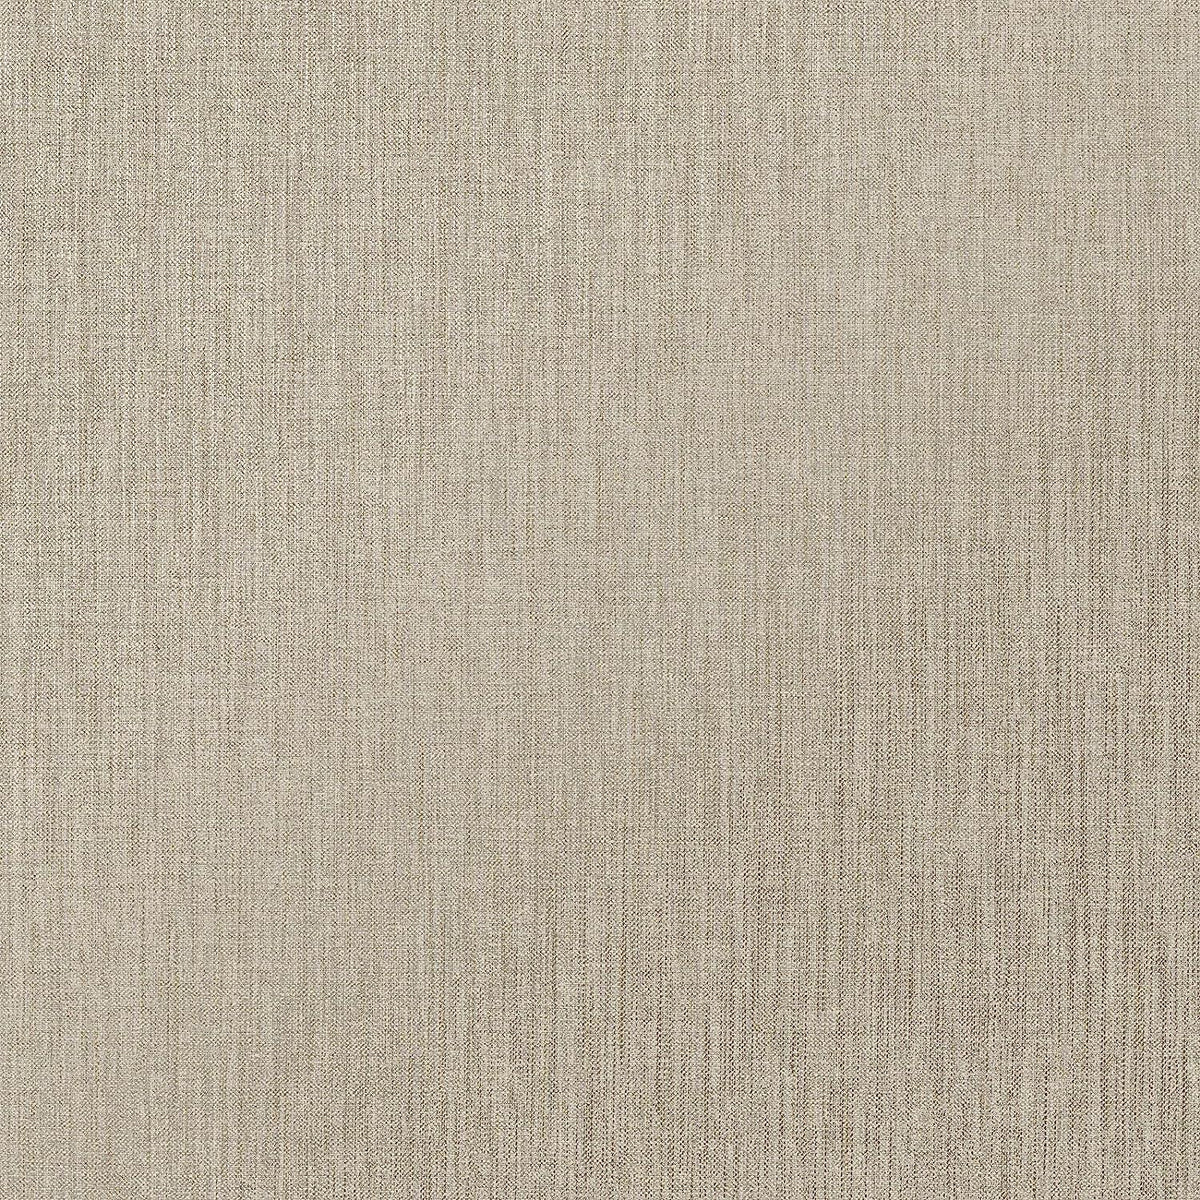 RASCH (U.K) Limited Amara Linen Wallpaper - Modern Wallpaper for Living Room, Bedroom, Fireplace - Decorative Luxury Wall Paper with Realistic Textile Thread Effect &amp; Subtle Gold Glimmer (Beige)